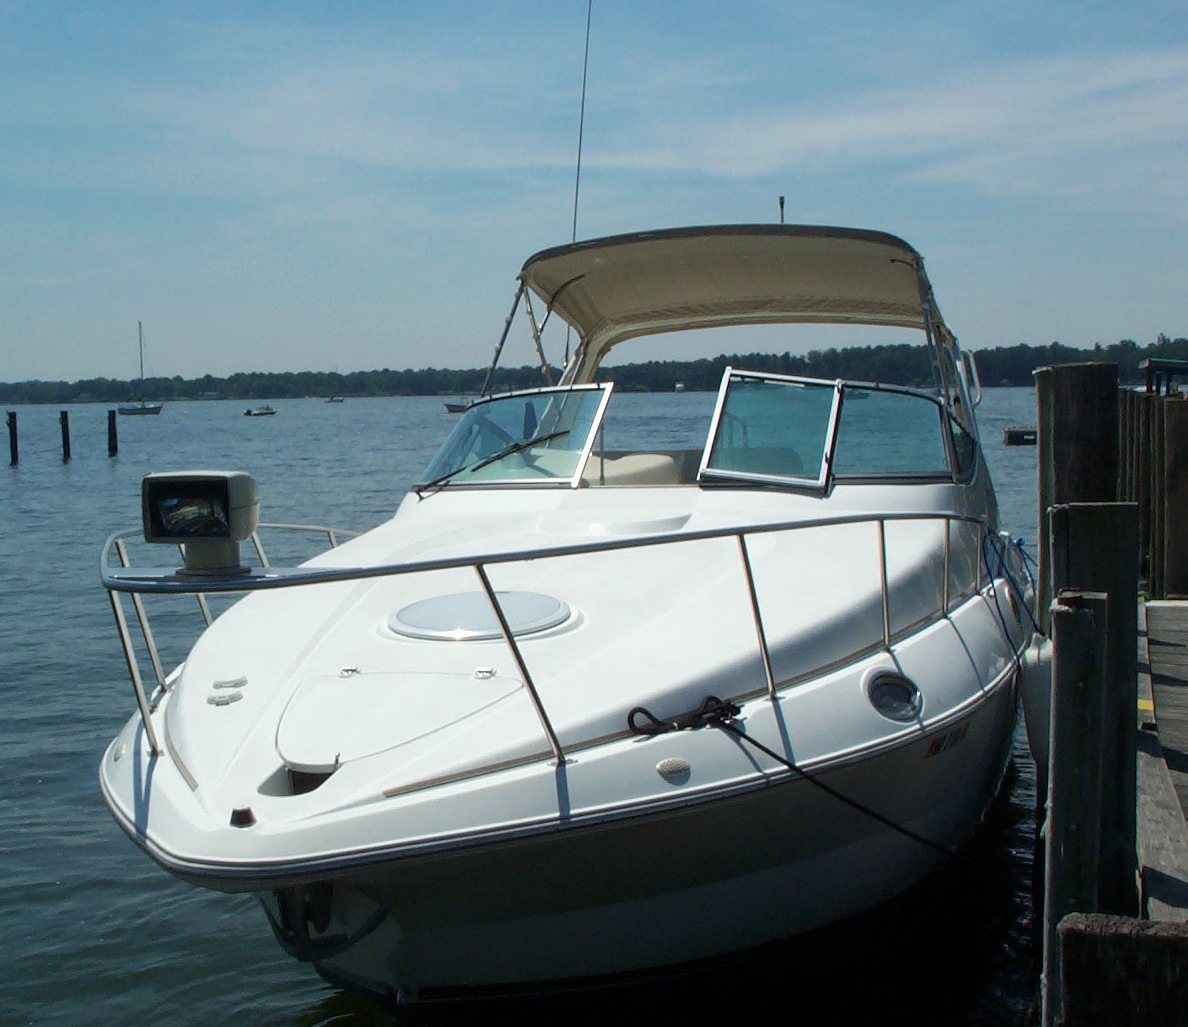 Boat Loan Financing Basics When Purchasing New or Used Boats - My Boat Life